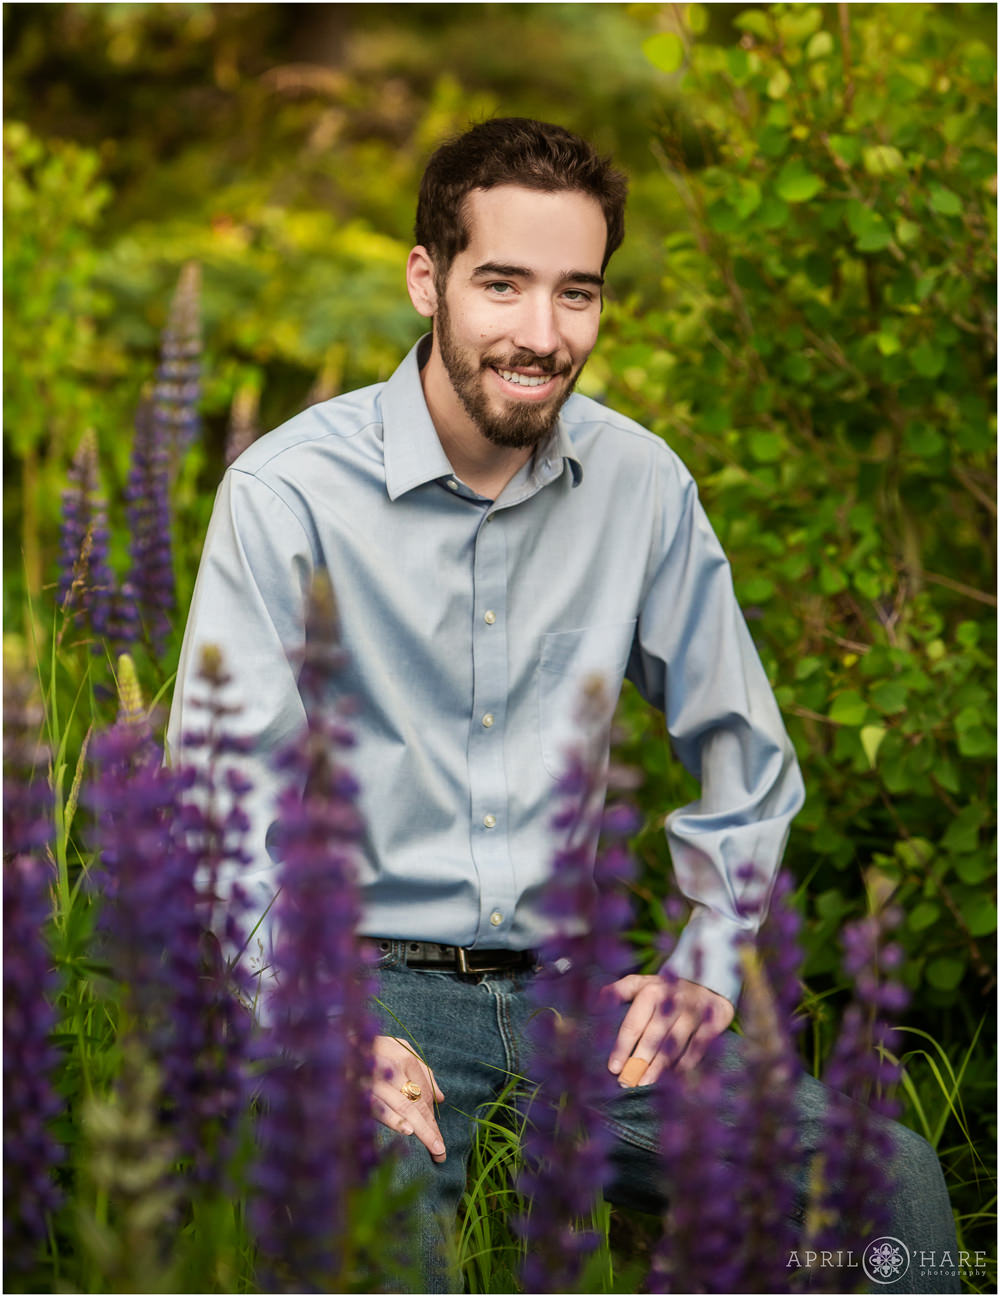 Son gets an individual portrait at his family's portrait session at Point Park in Colorado